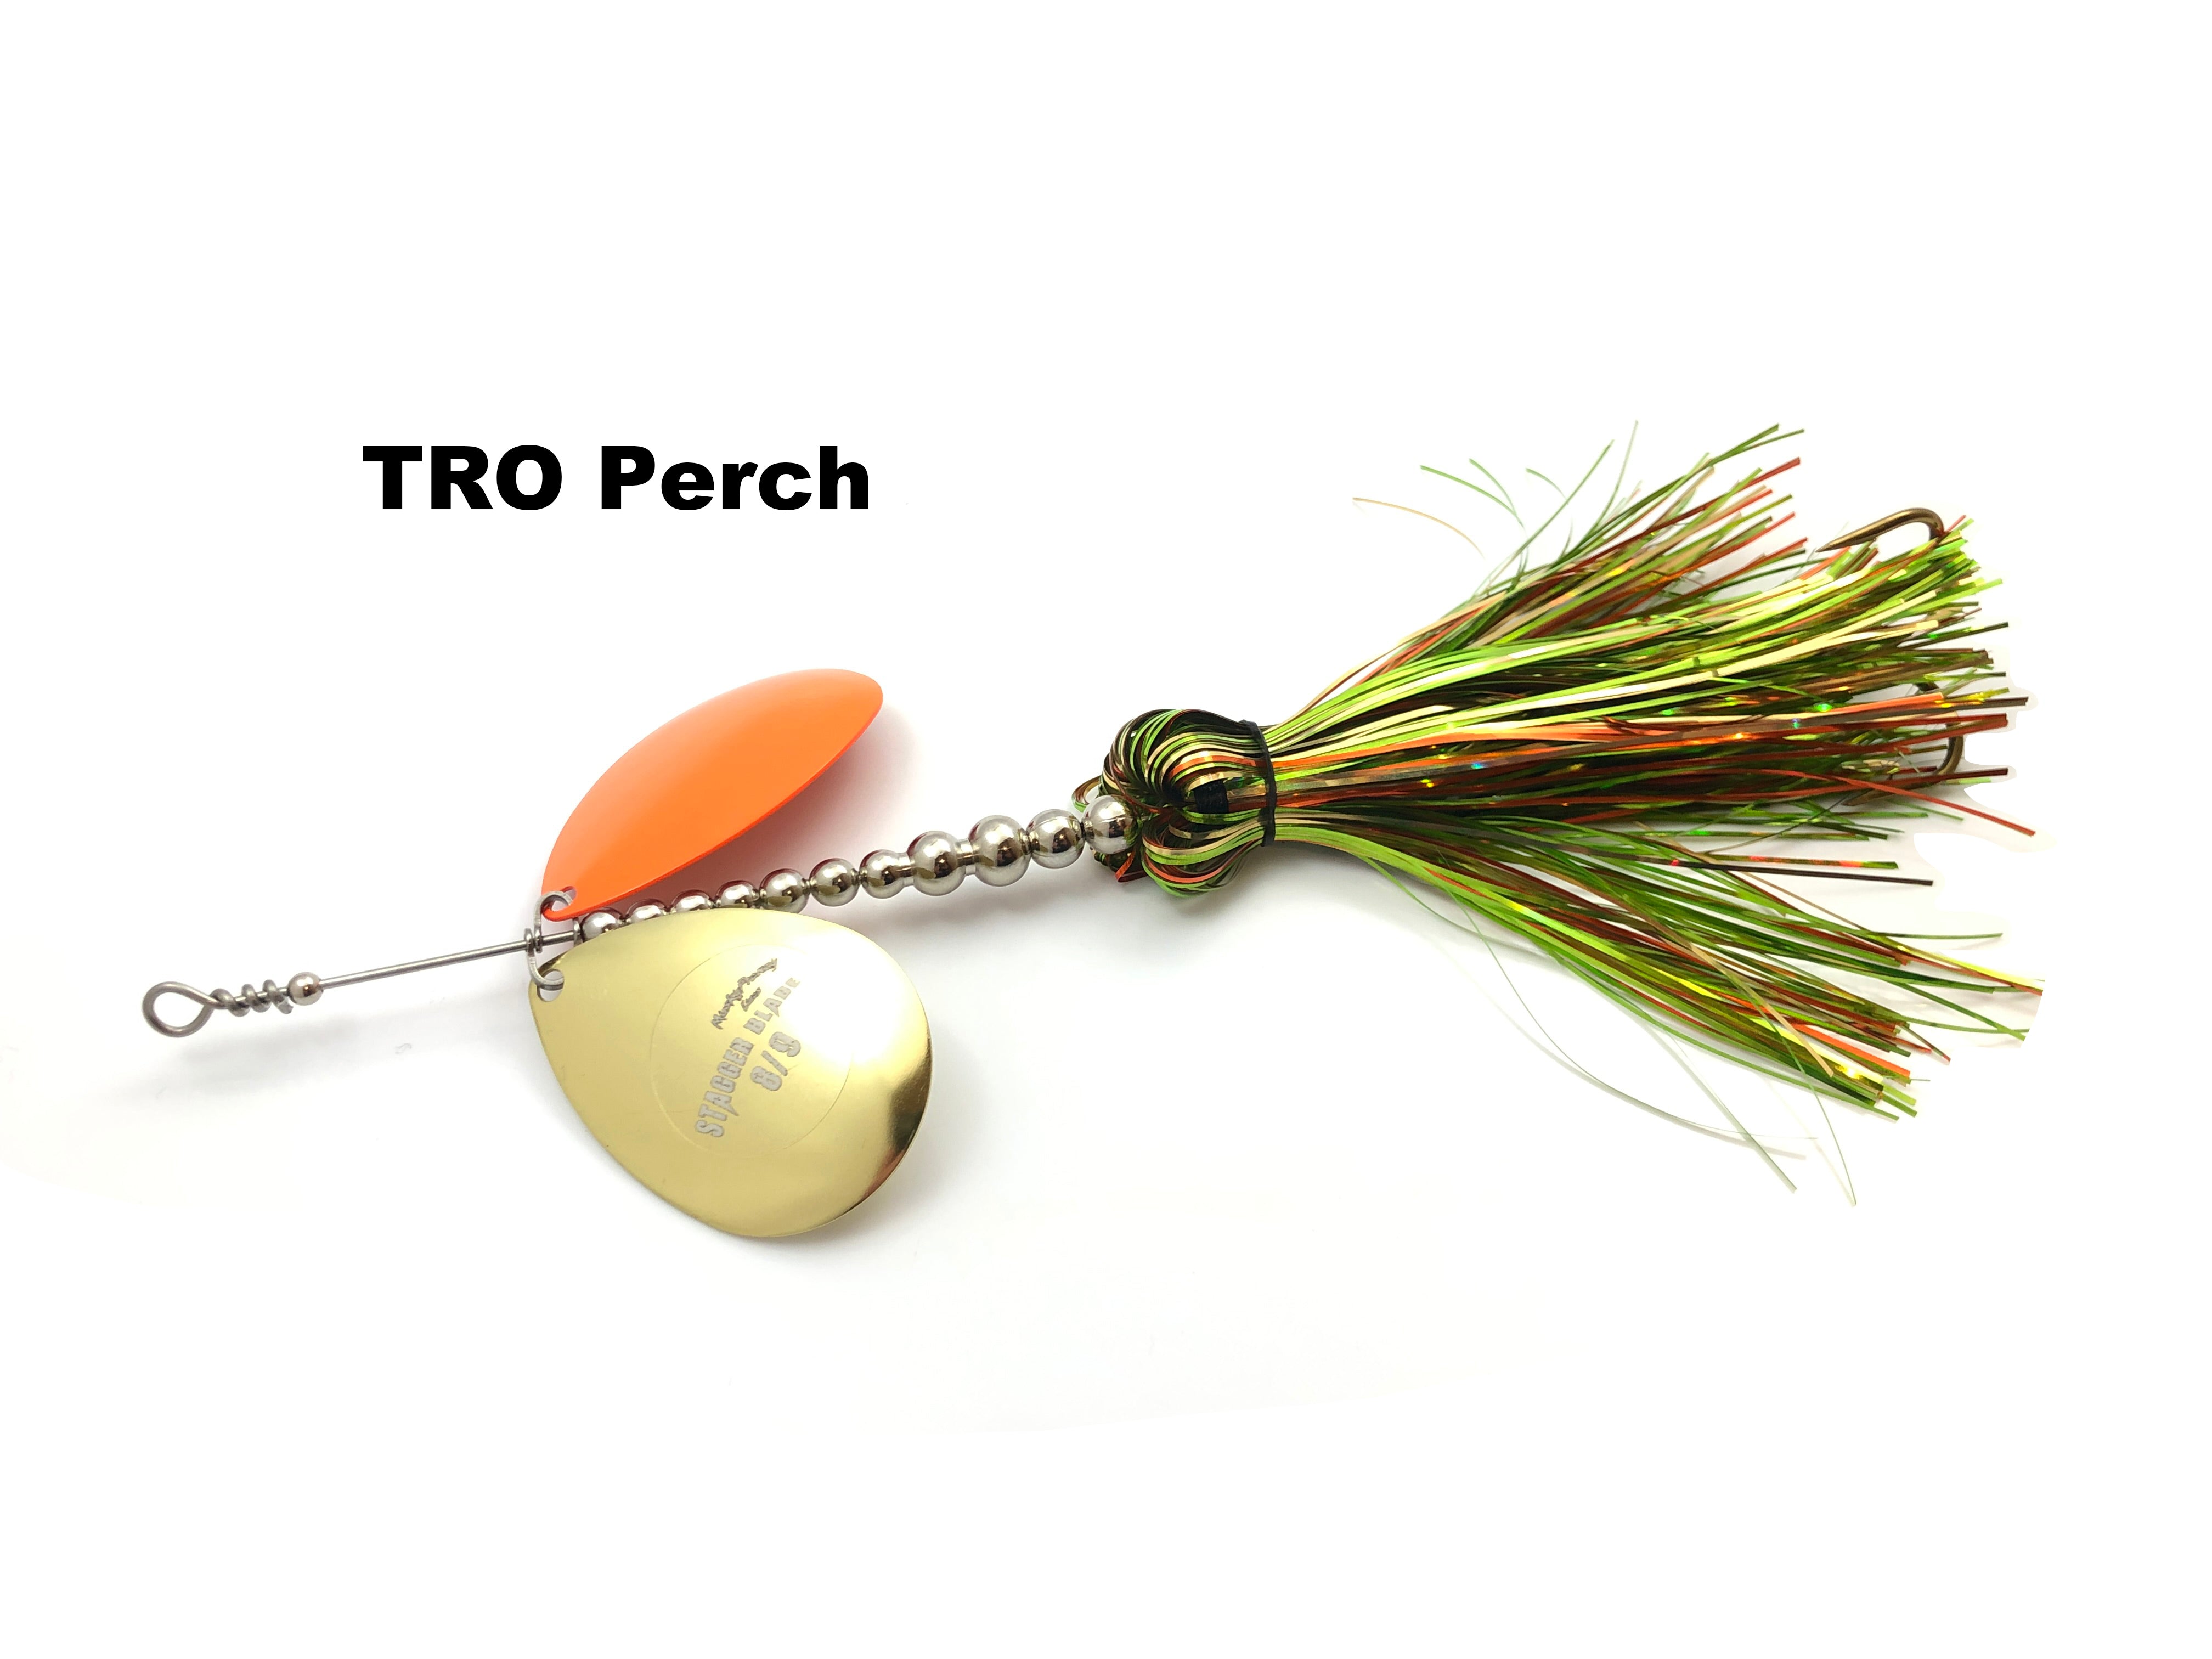 Bucktails – tagged Stagger Blade Musky Lure – Team Rhino